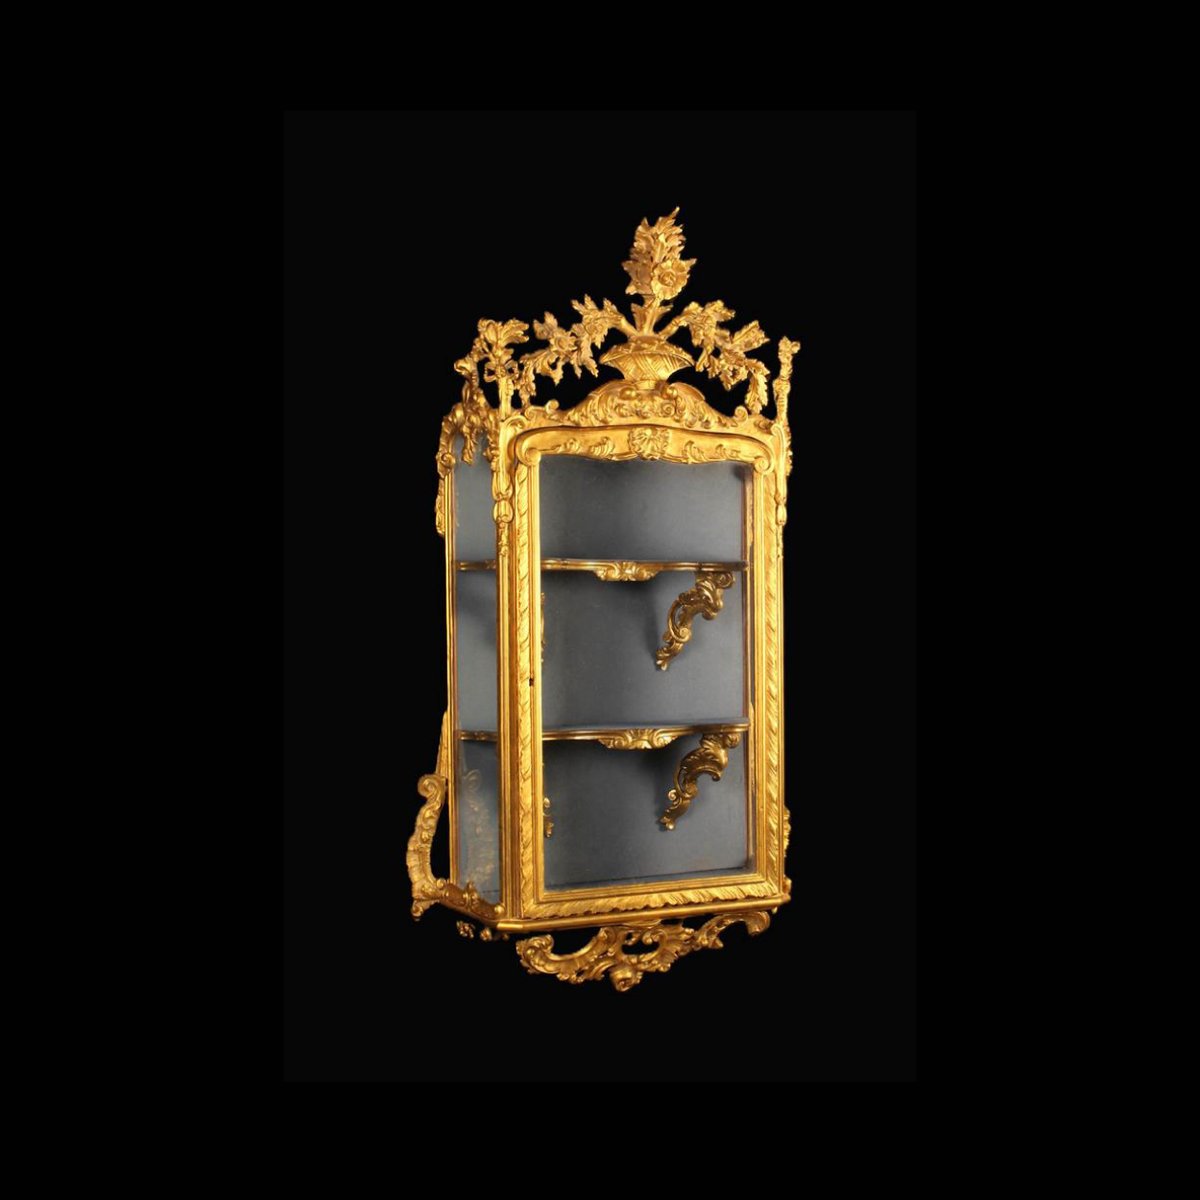 Did you pick this up? A Splendid 19th Century Carved & Gessoed Gilt Wall Cabinet. Hammer £1,400. #auction #onlineauction #auctionhouse #auctioneer #vintage #auctioneers #bid #antiques #antique #auctionswork #collection #sale #finefurniture #furniture